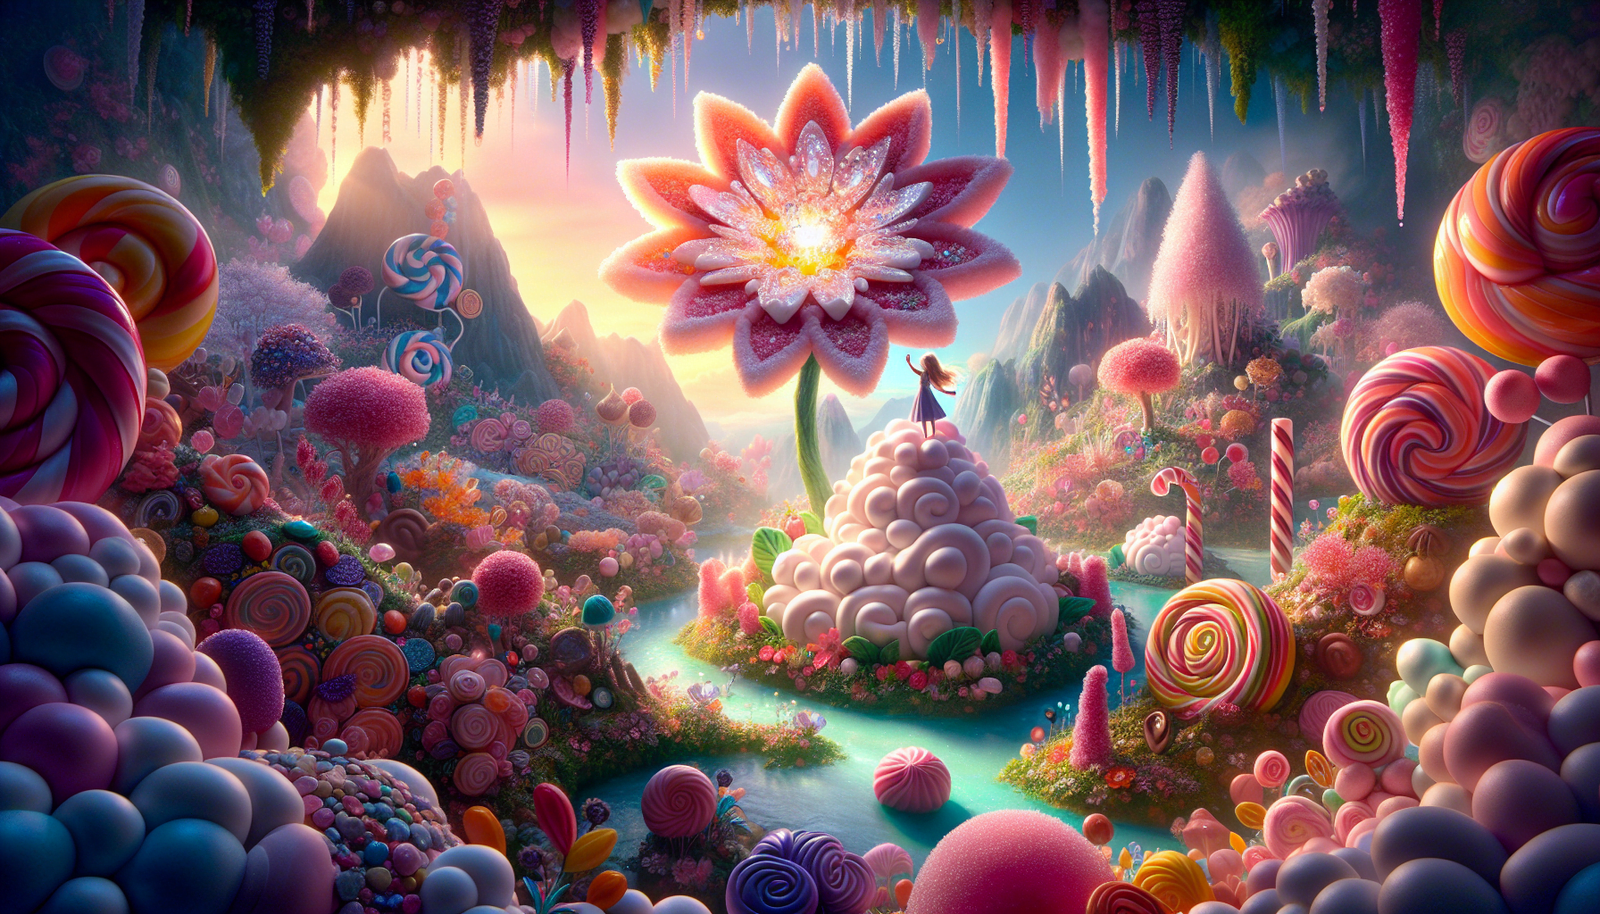 At the center of a magical landscape stands a young girl atop a mountain made entirely of fluffy marshmallows.